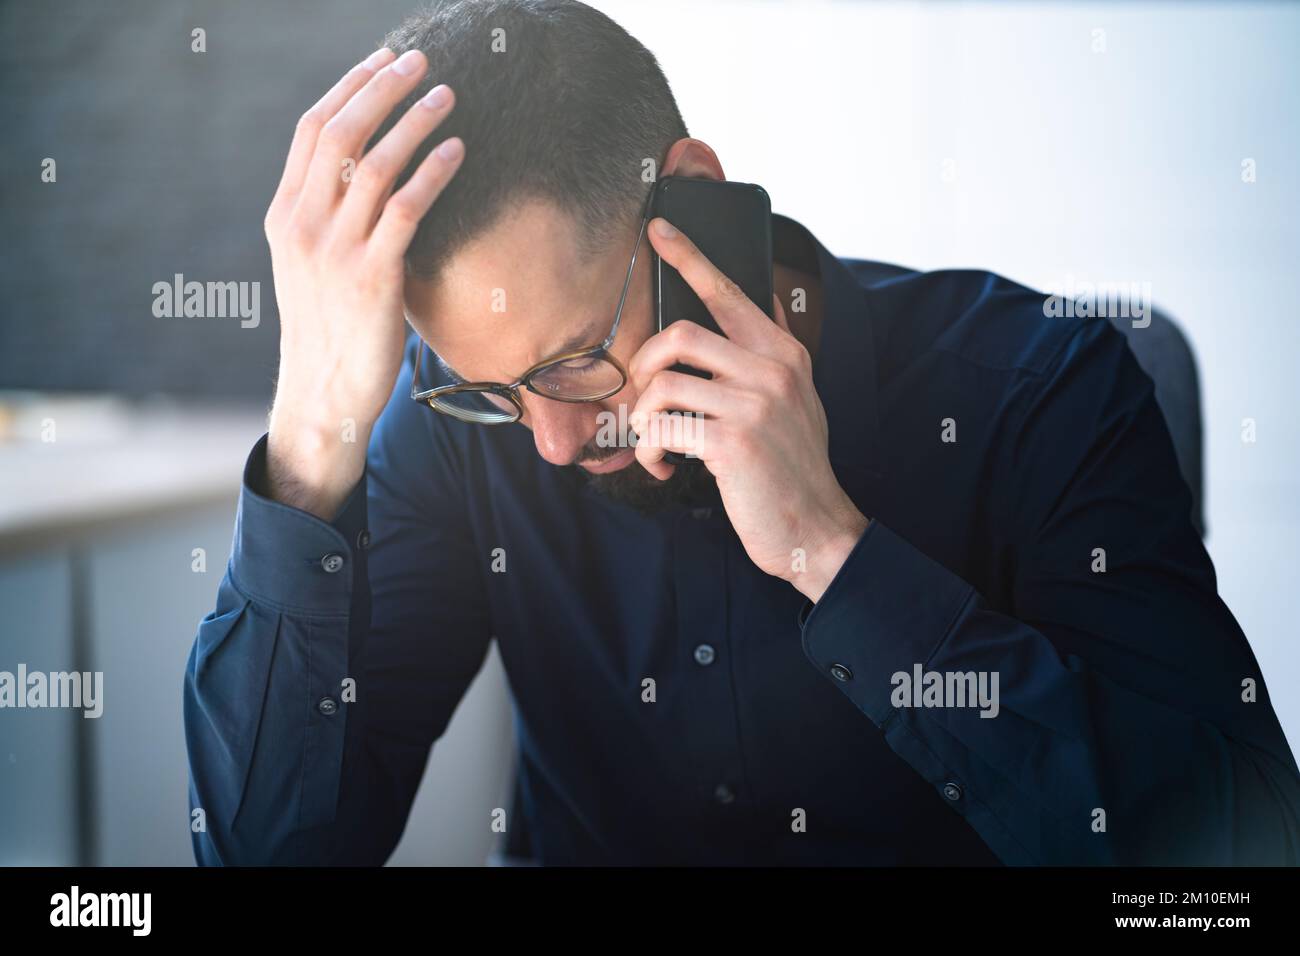 Male Man Talking On Mobile Phone Or Smartphone Stock Photo